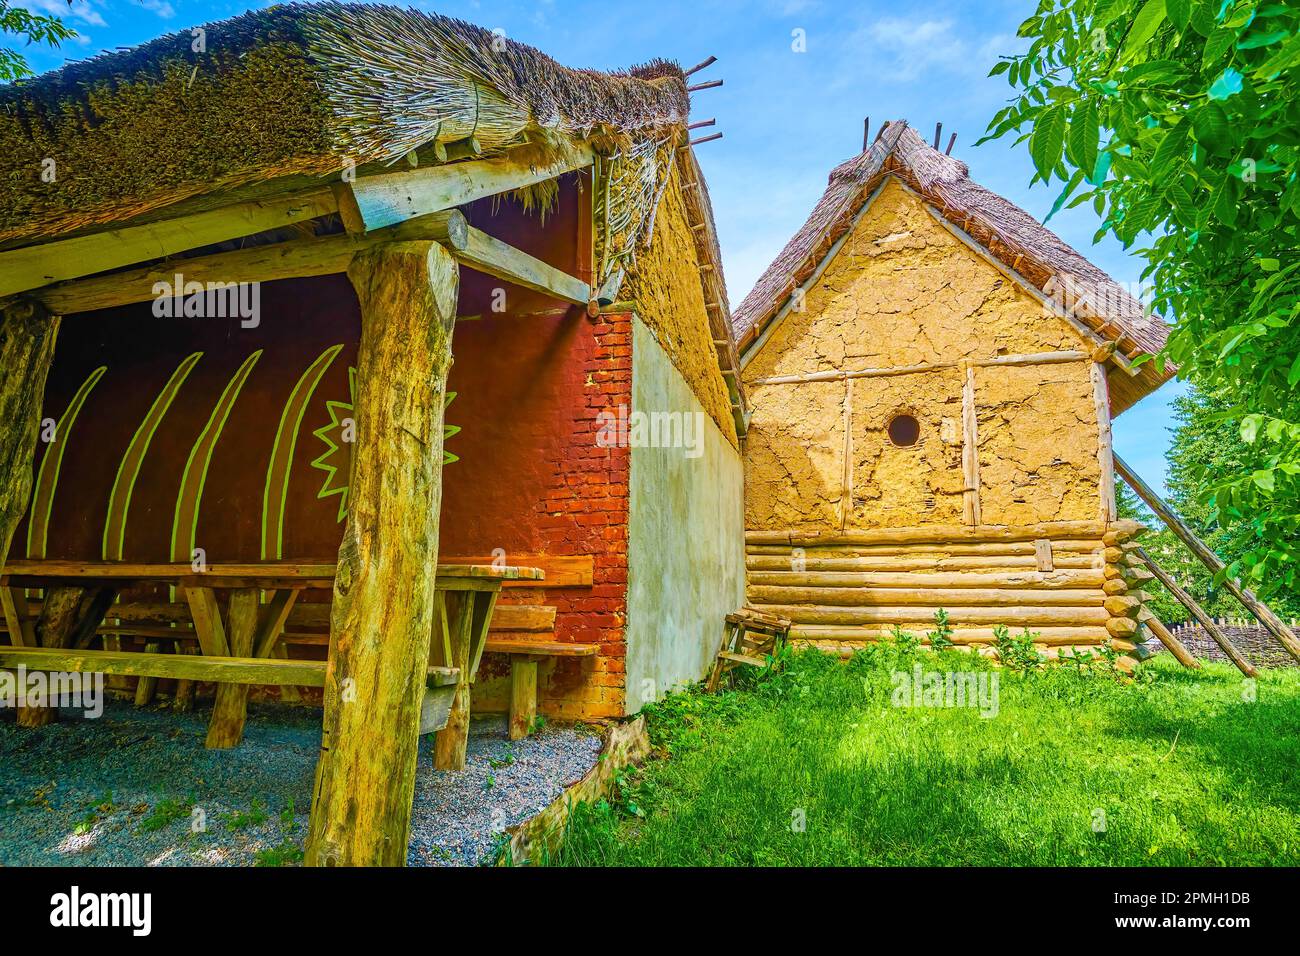 Trypil settlement with adobe houses in open air Trypil culture museum in Talne village, Ukraine Stock Photo